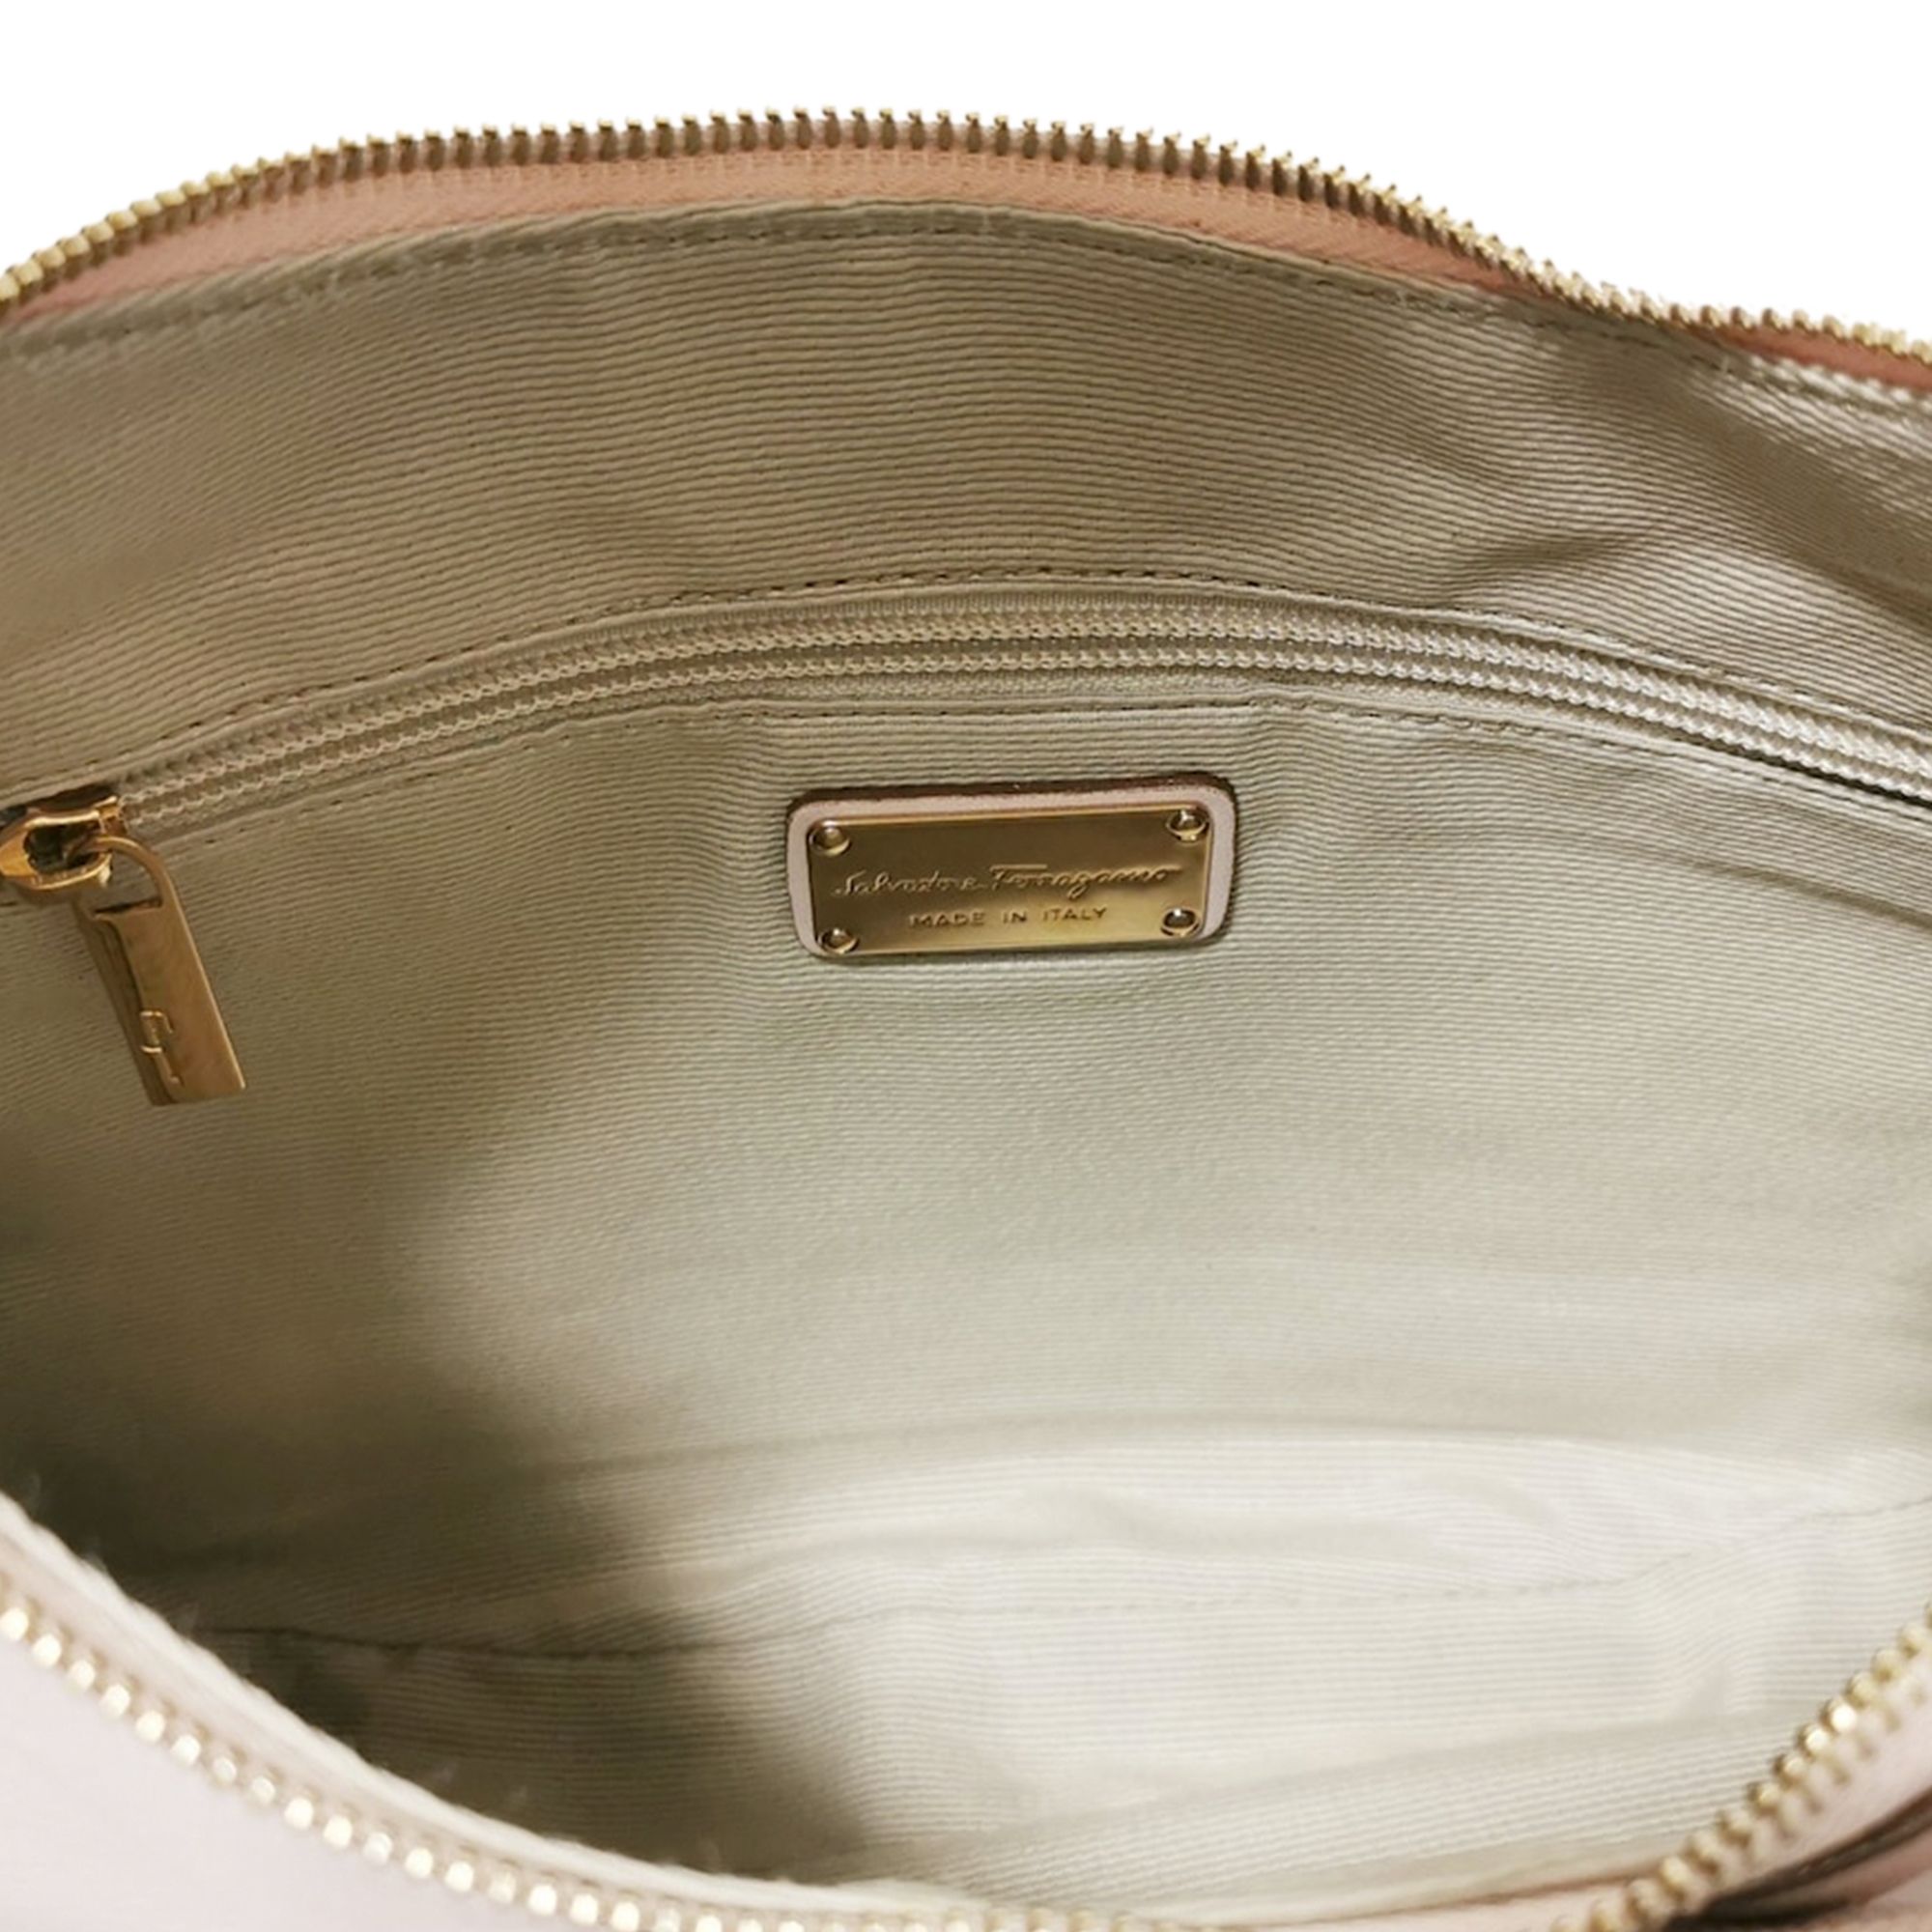 VINTAGE. RRP AS NEW. This shoulder bag features a leather body, a ribbon detail, a flat leather strap, a top zip closure, and interior zip pocket.Exterior front, back and sides are scratched and discolored. Exterior back is discolored and stained with transfer of color. Exterior bottom is discolored. Exterior front is discolored. Exterior handle is discolored, out of shape and stained with transfer of color. Exterior side is discolored. Buckle is scratched. Zipper is scratched.

Dimensions:
Length 20cm
Width 27cm
Depth 4cm
Shoulder Drop 22cm

Original Accessories: Dust Bag

Color: White
Material: Leather x Calf
Country of Origin: Italy
Boutique Reference: SSU125500K1342


Product Rating: GoodCondition

Certificate of Authenticity is available upon request with no extra fee required. Please contact our customer service team.